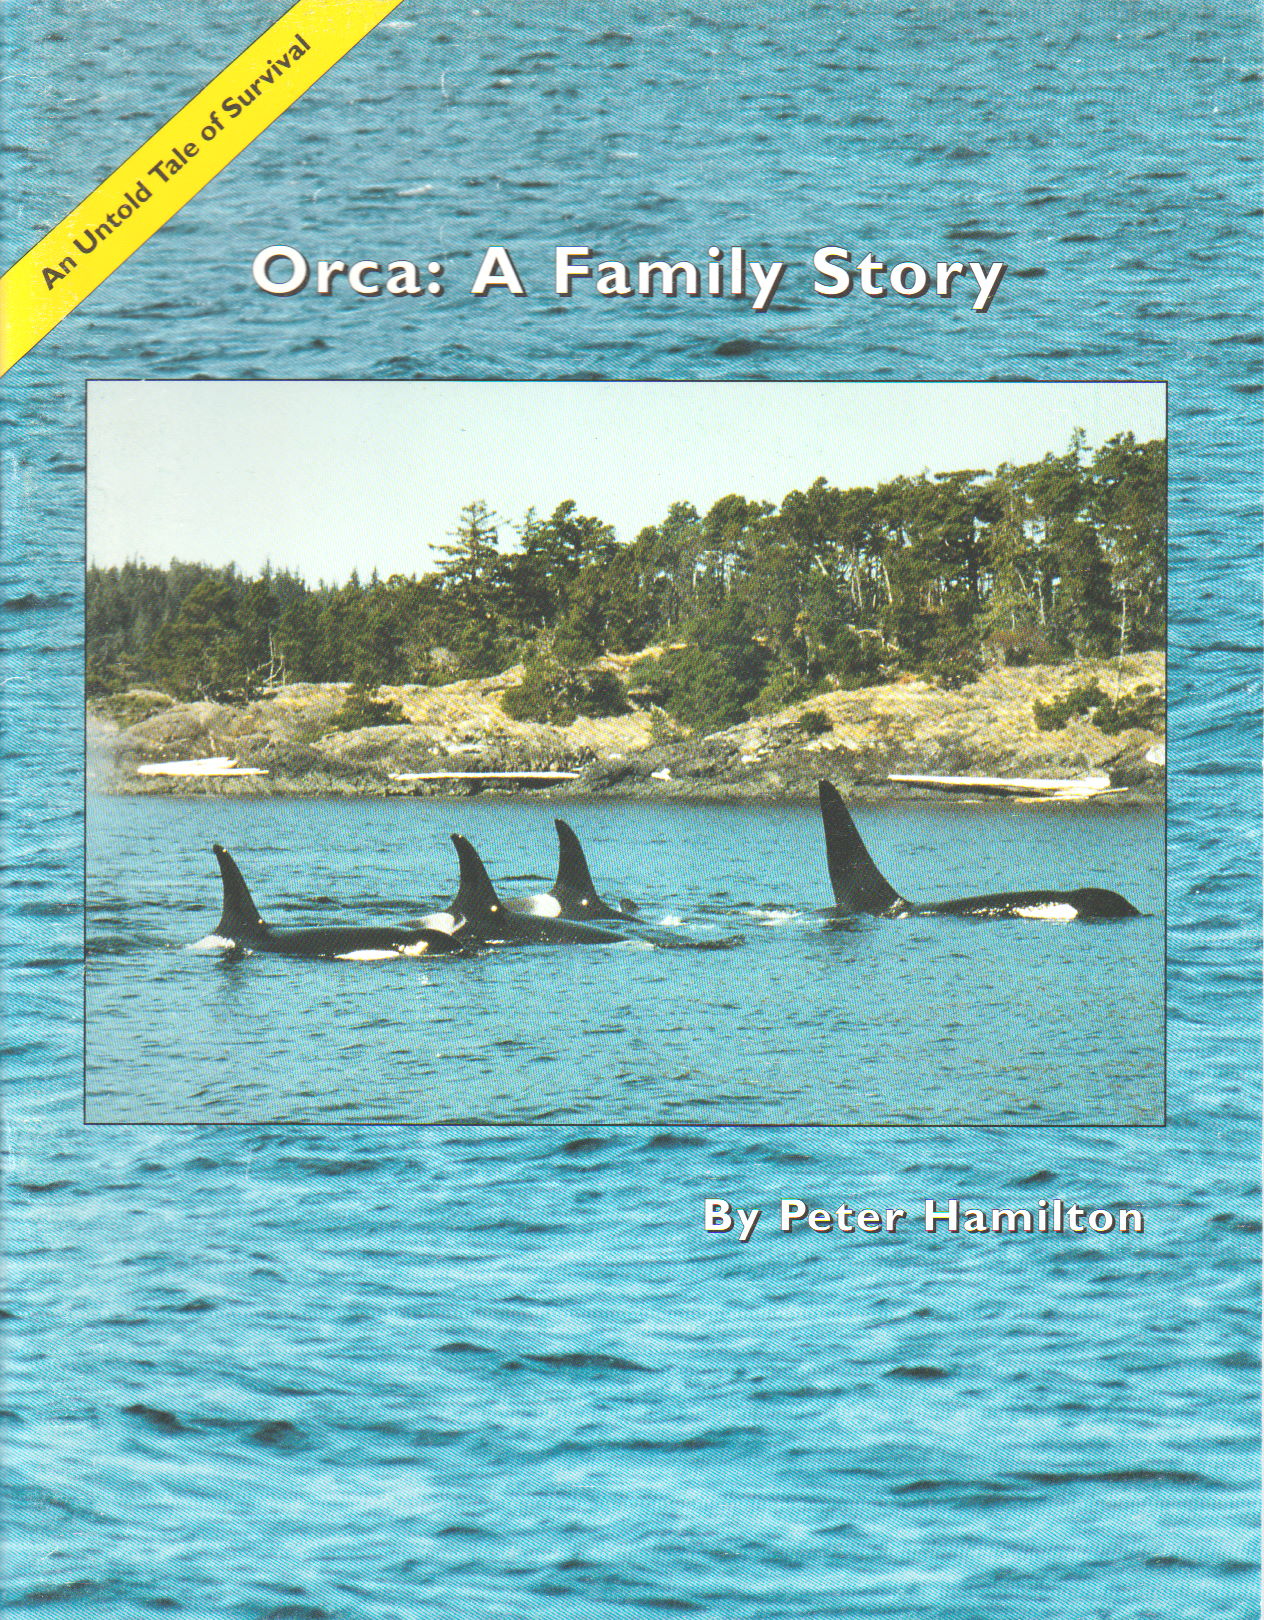 Help Celebrate Orca Action Month! June 2020!